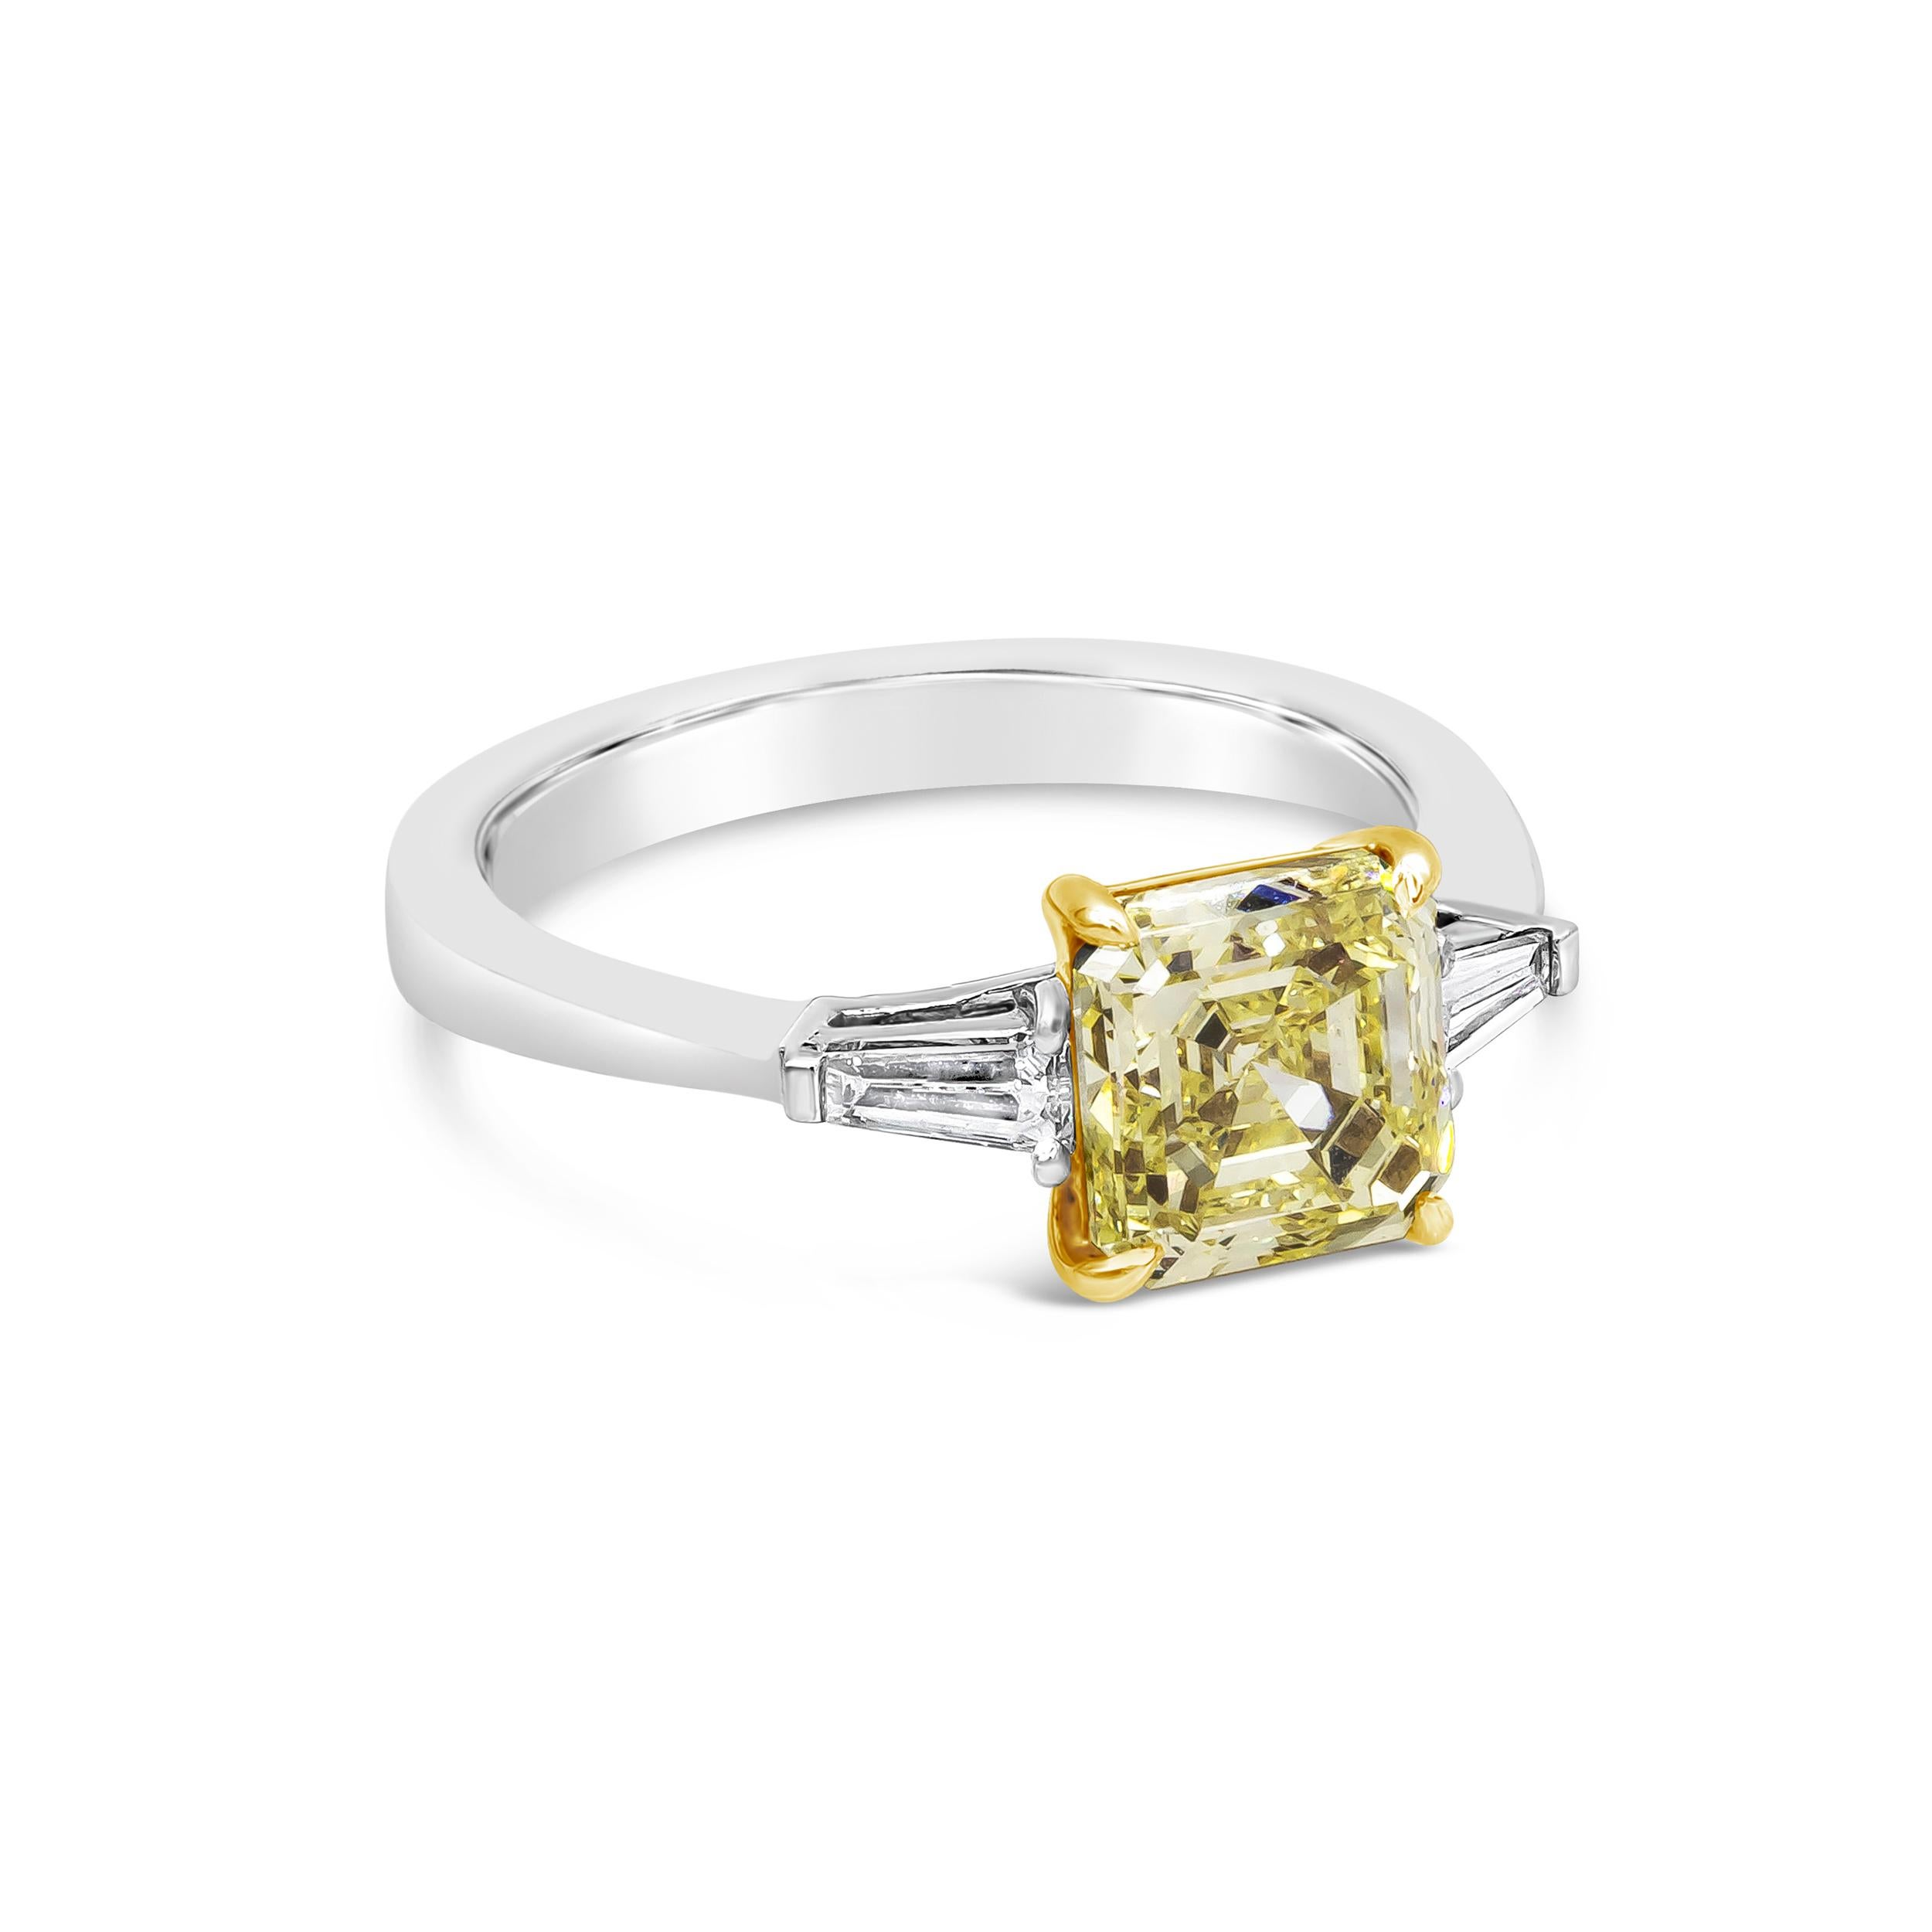 Showcasing a color-rich asscher cut yellow diamond weighing 2.13 carats, flanked by two tapered baguette diamonds weighing 0.24 carats total, set in a polished platinum mounting. GIA certified the center diamond as Fancy Yellow color, Internally